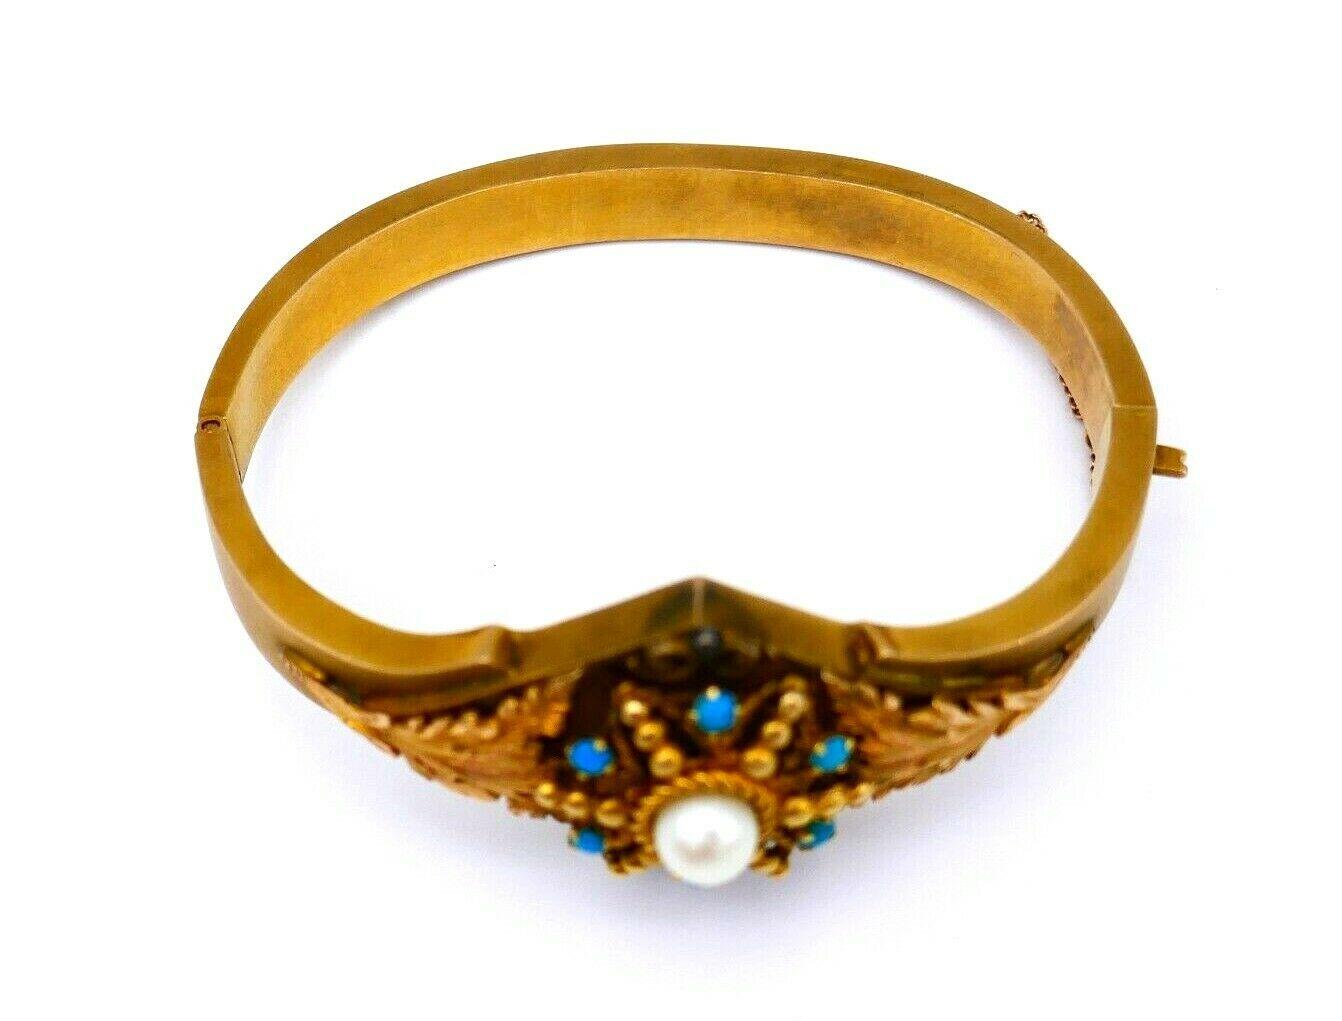 A beautiful antique bangle bracelet made of 14k yellow gold, pearl and turquoise. The ornament part features textured leafy gold elements and gold beads. 
Stamped with maker's mark and a hallmark for 14k gold.
Measurements: inner circumference is